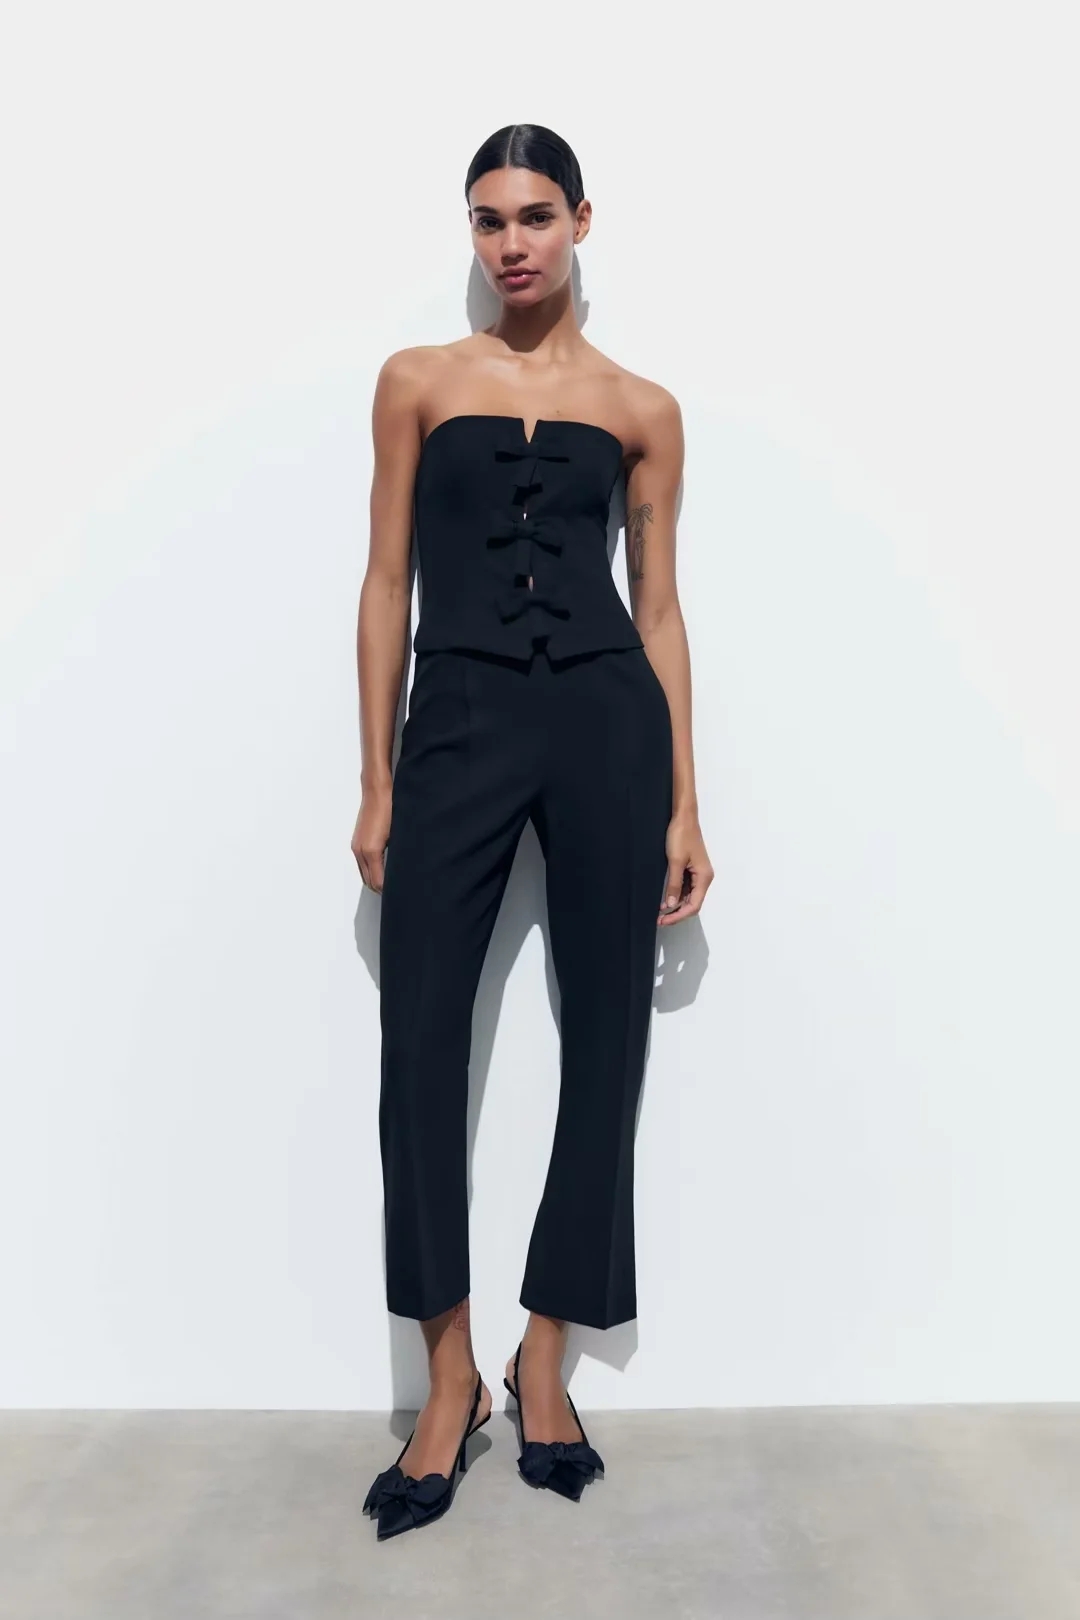 Fashion Black Polyester Bow Hollow Tube Top Jumpsuit,Tank Tops & Camis